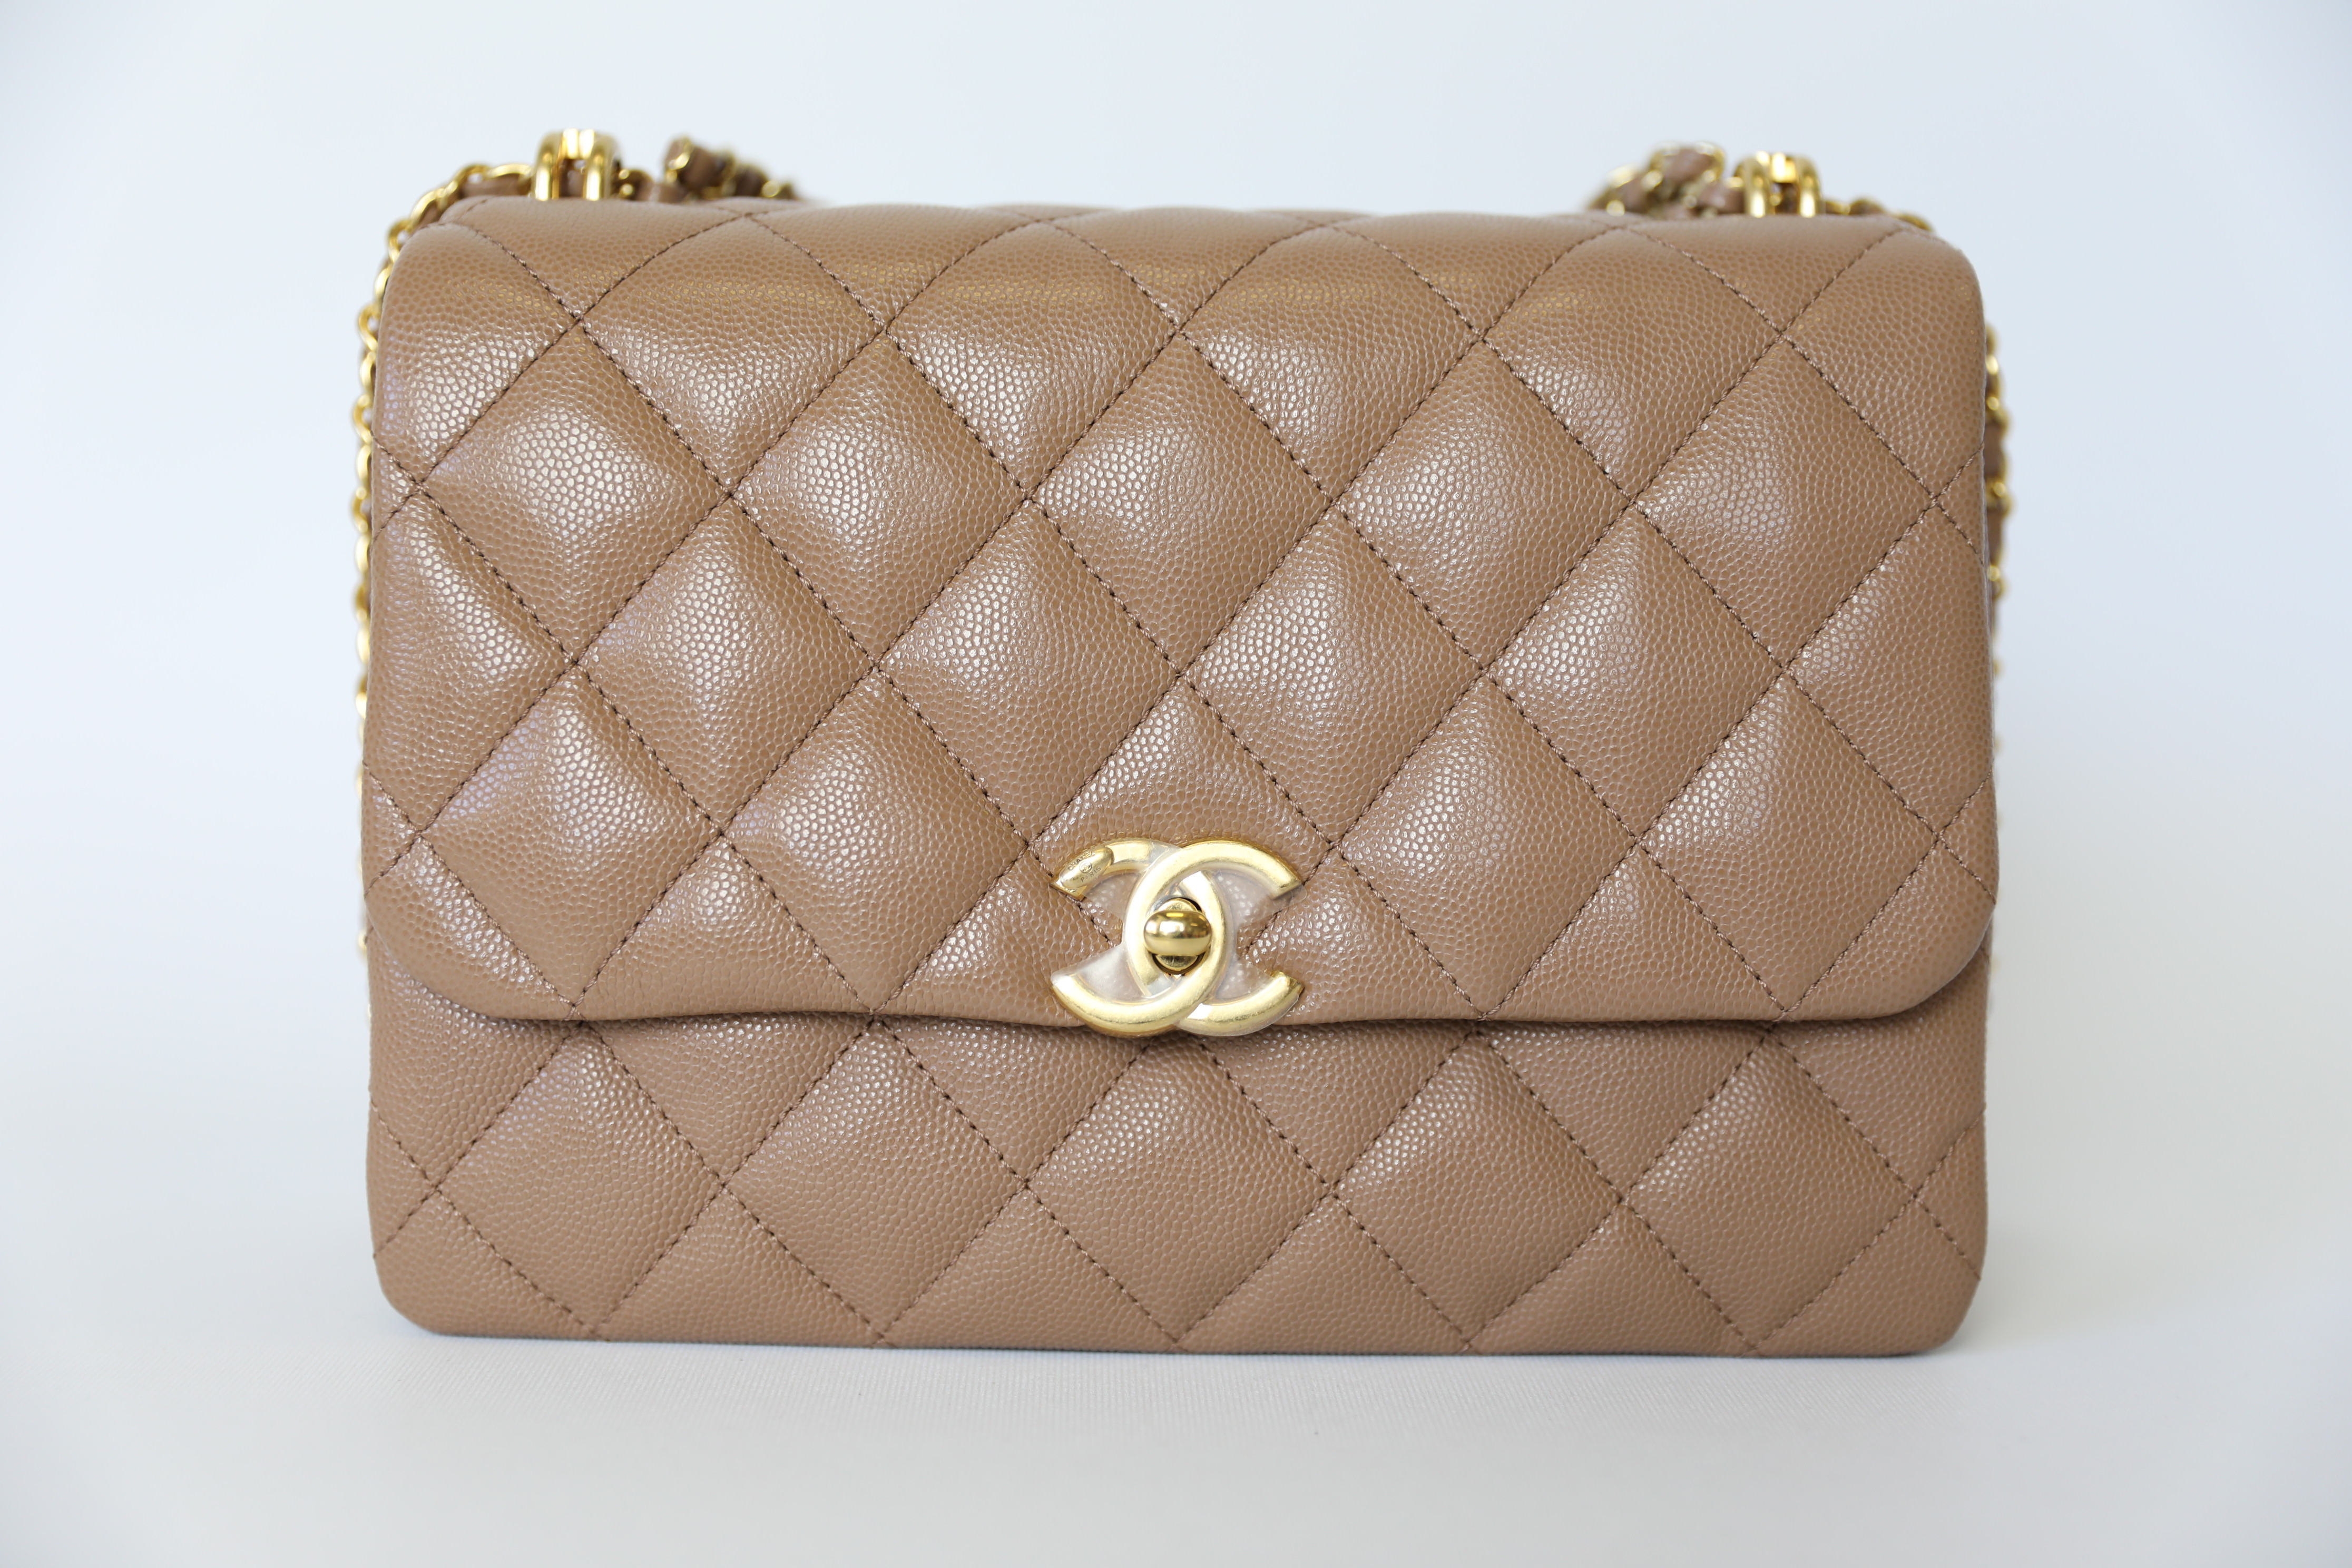 Chanel Coco First Flap Bag, Beige Caviar Leather With Gold